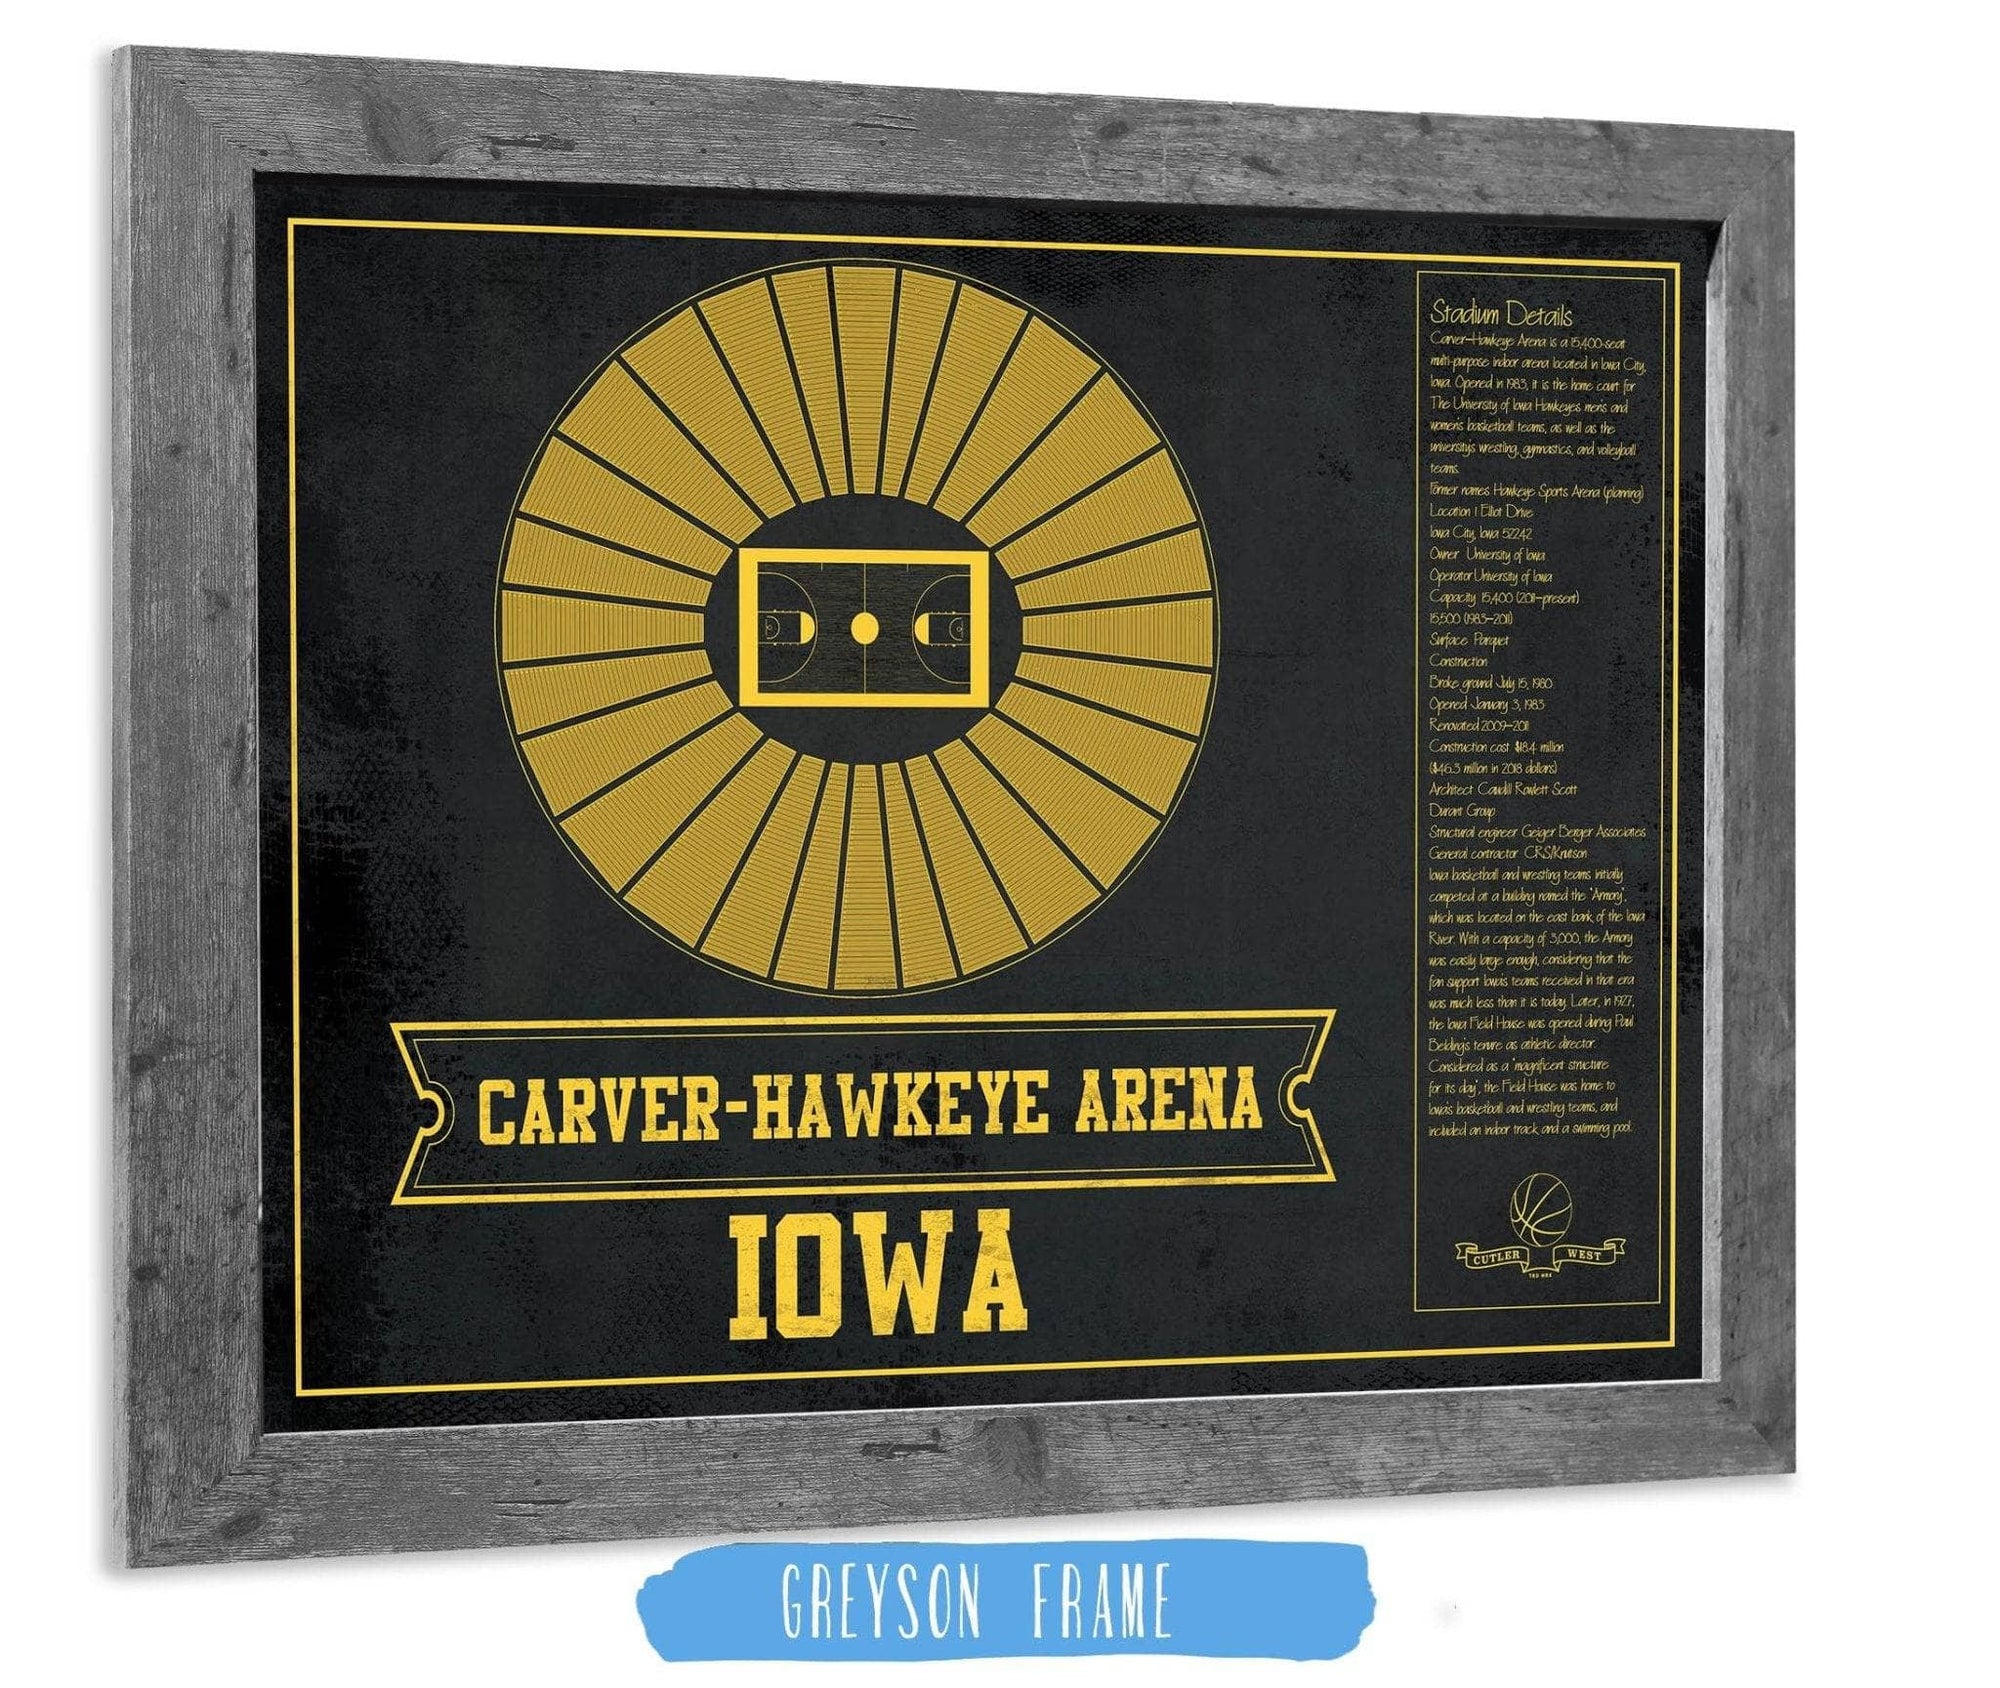 Cutler West Basketball Collection 14" x 11" / Greyson Frame Carver–Hawkeye Arena Iowa Men's And Women's Basketball Team Vintage Print 933350234_83499